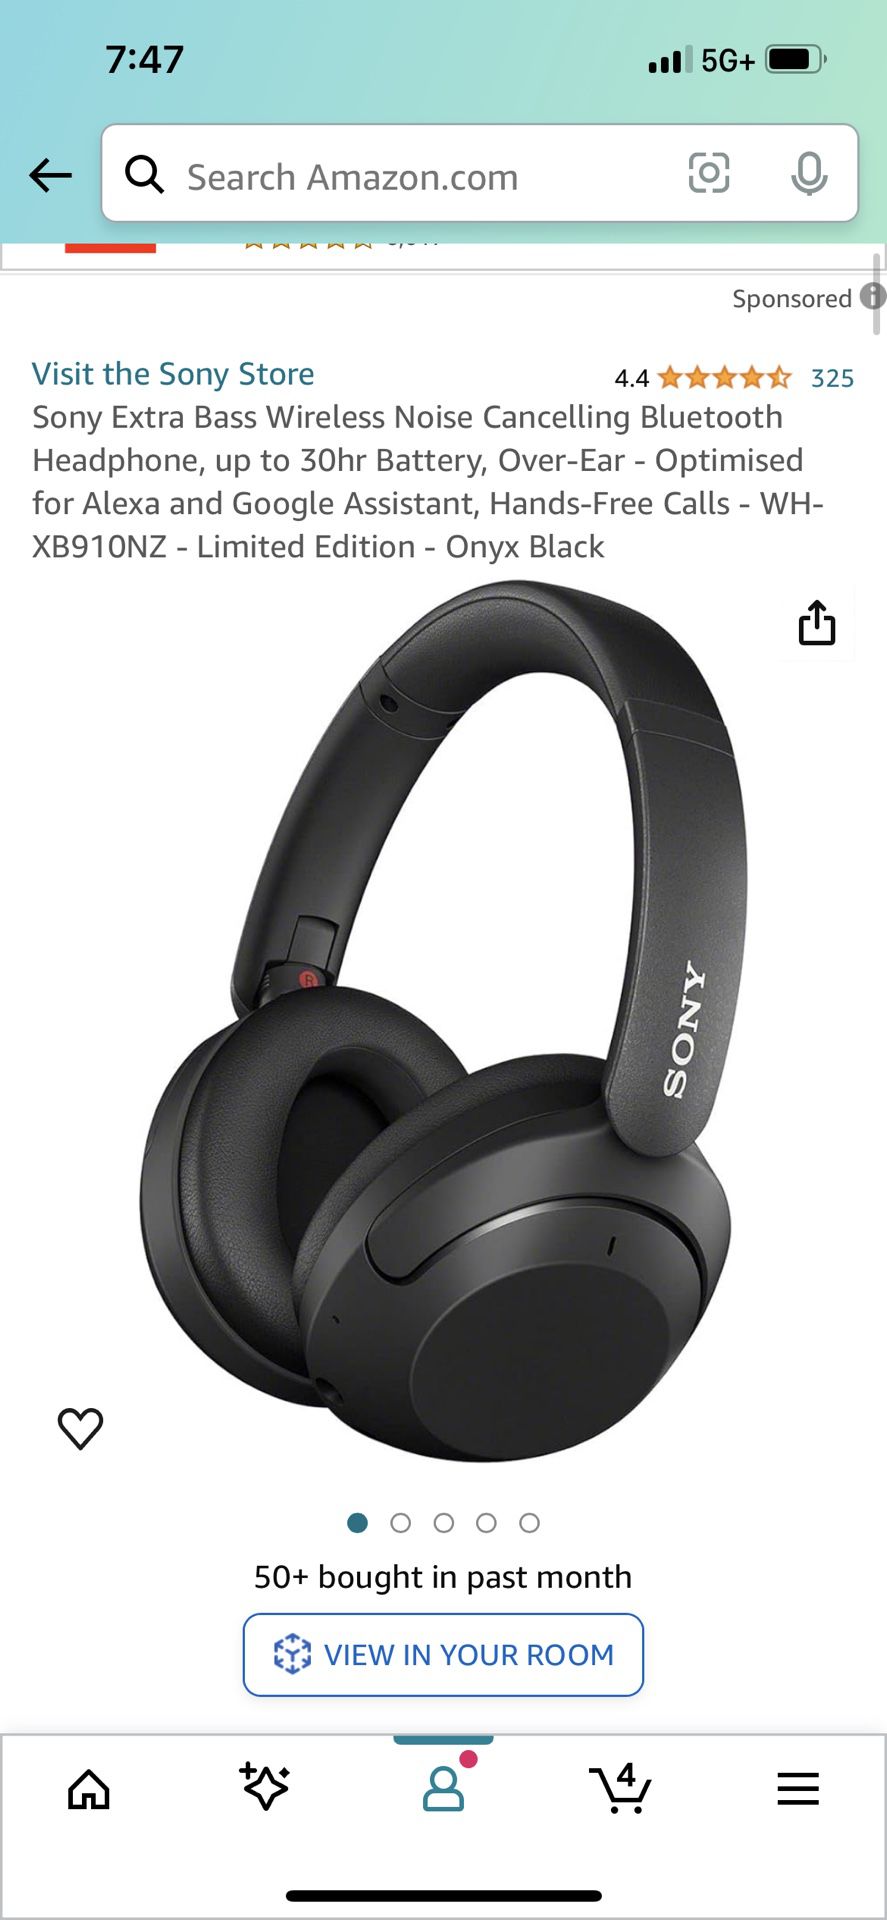 Sony Bass Boosted Headphones